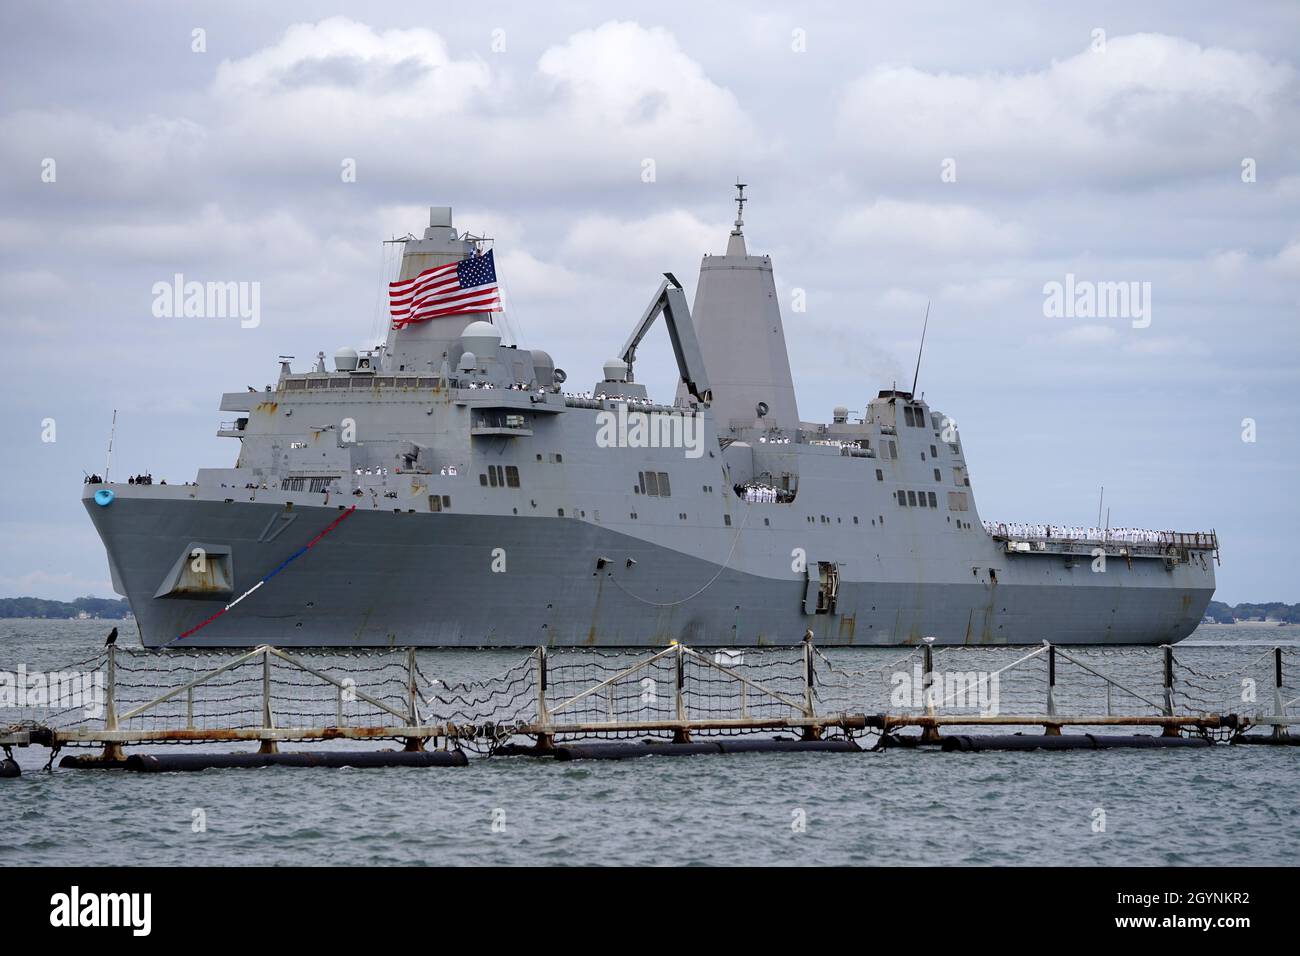 NORFOLK, Va. – The San Antonio class amphibious transport dock ship USS San Antonio (LPD 17) transits the Elizabeth River in preparation for its return to homeport. San Antonio returned to its homeport at Naval Station Norfolk Oct. 8, following a six-month deployment to the U.S. 5th and U.S. 6th Fleet areas of operation. (U.S. Navy photo by Mass Communication Specialist 1st Class Joshua D. Sheppard) Stock Photo